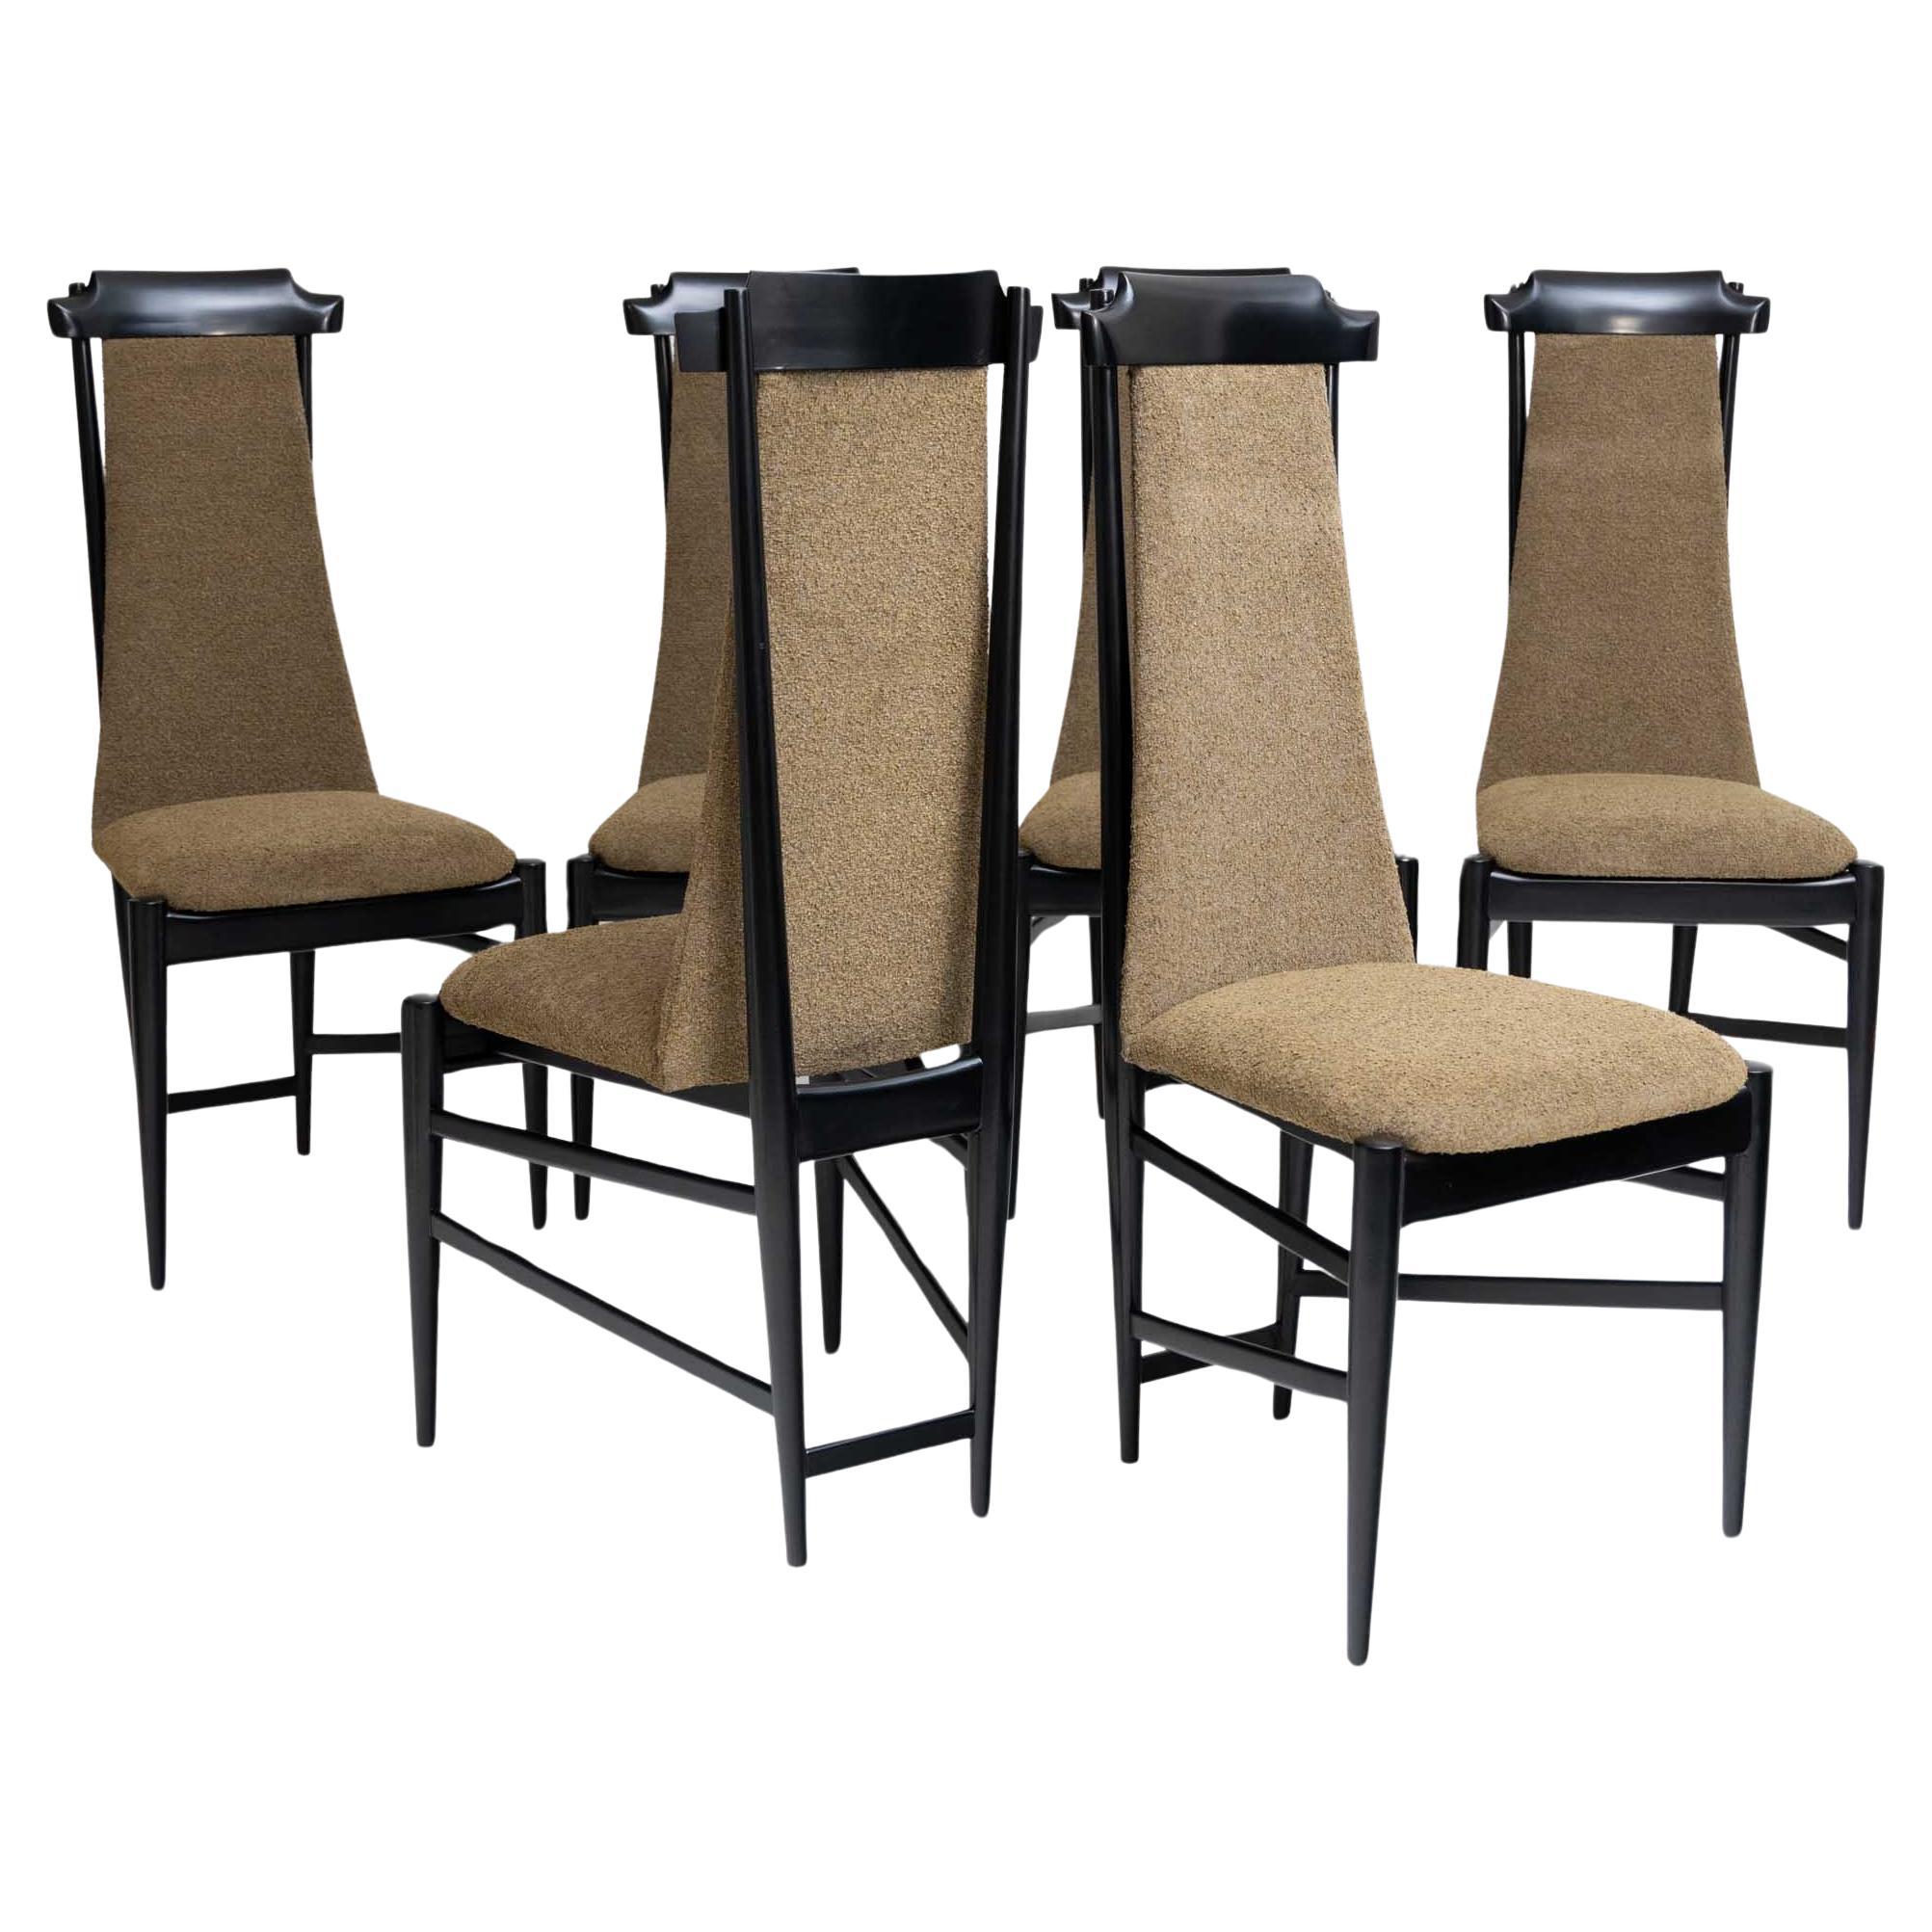 Six chairs by Sergio Rodrigues (Brazil, 1927-2014), Italy 1960s